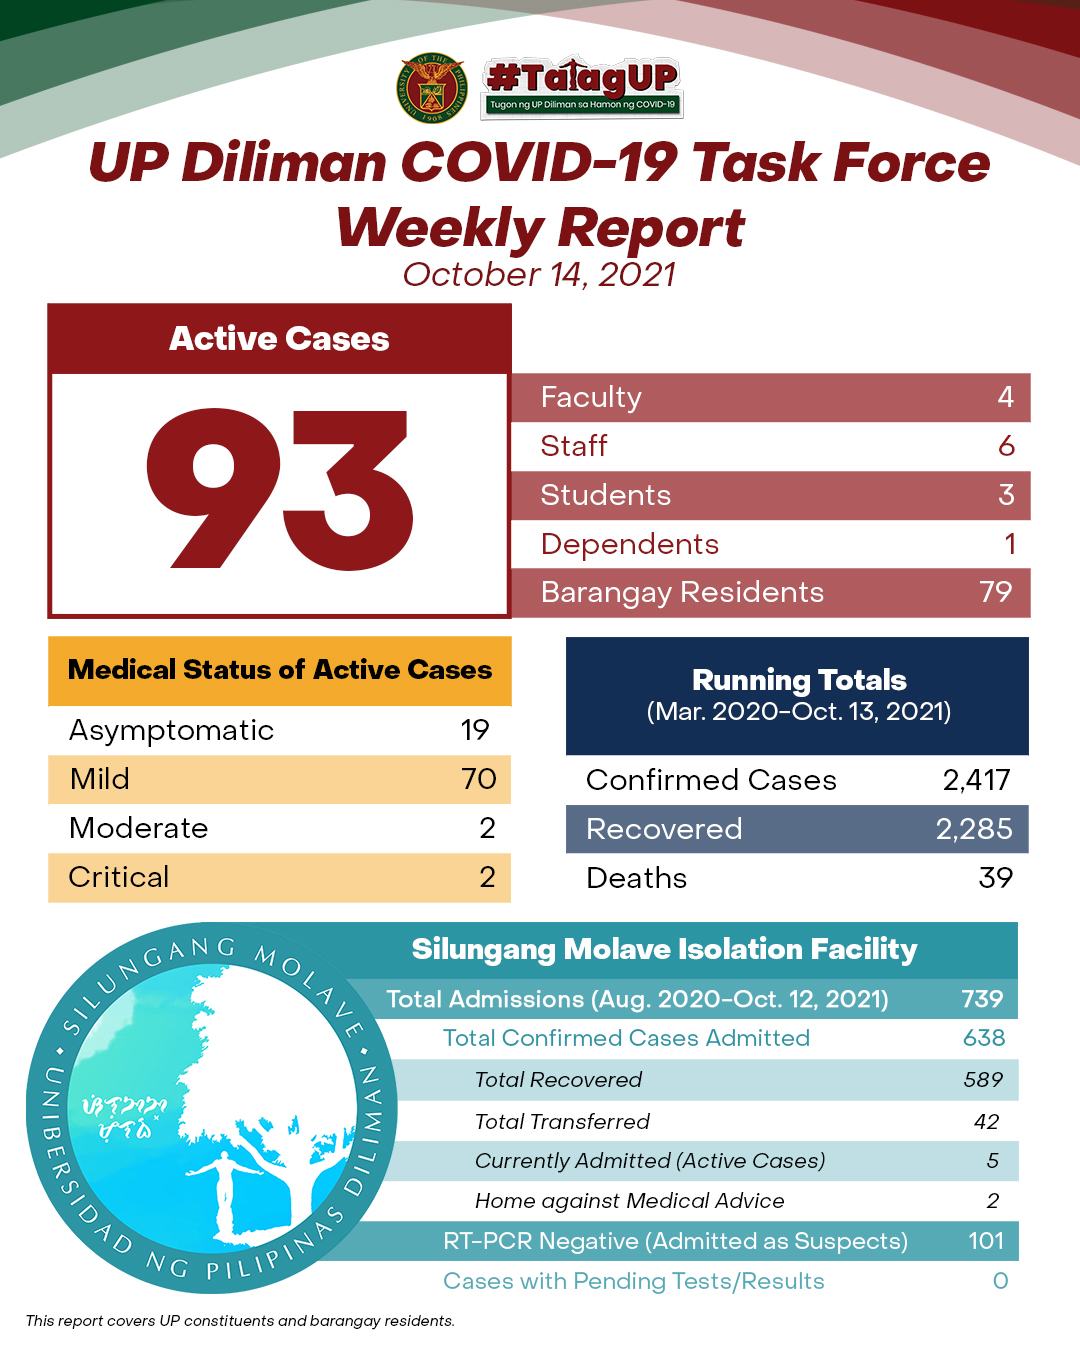 UP Diliman COVID-19 Task Force Weekly Report (October 14, 2021)